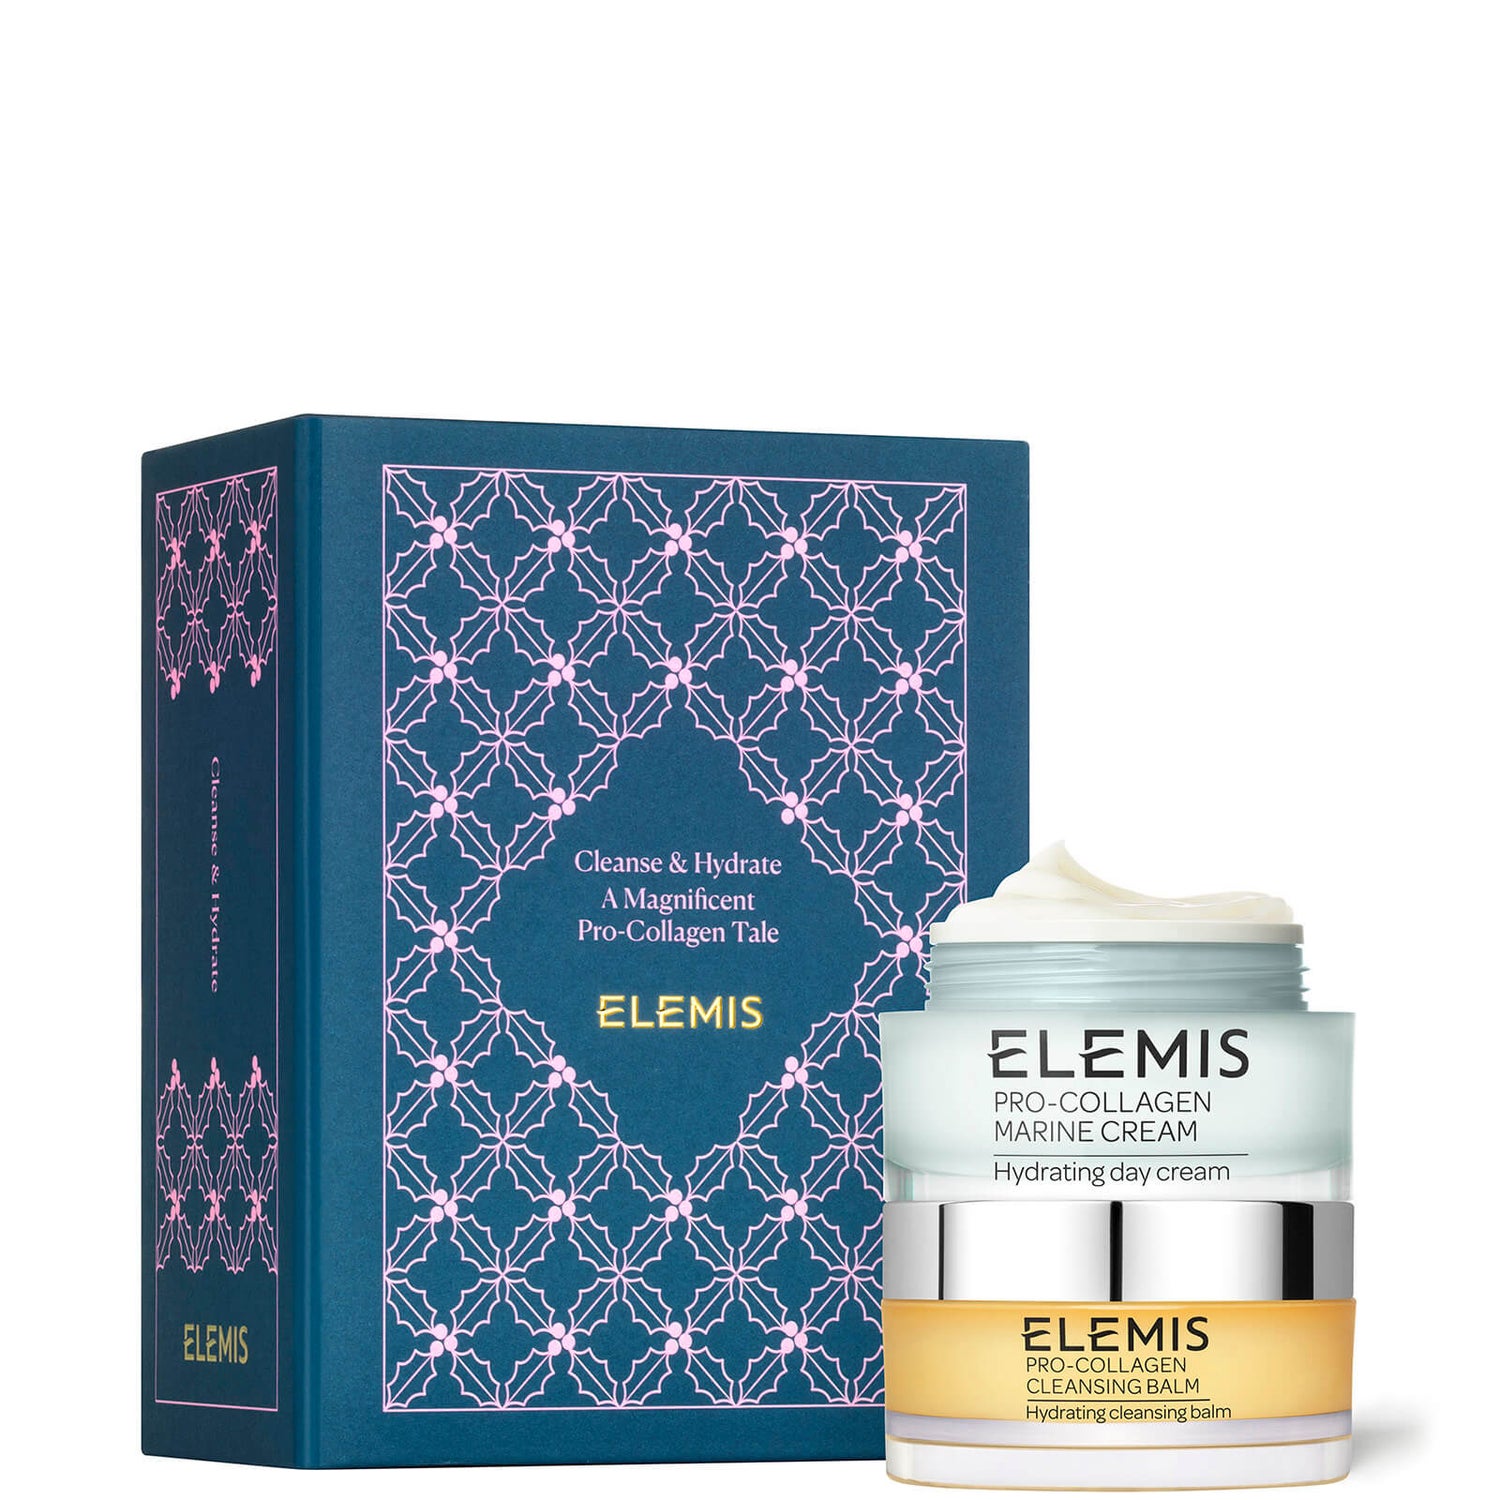 Cleanse & Hydrate A Magnificent Pro-Collagen Tale Gift Set